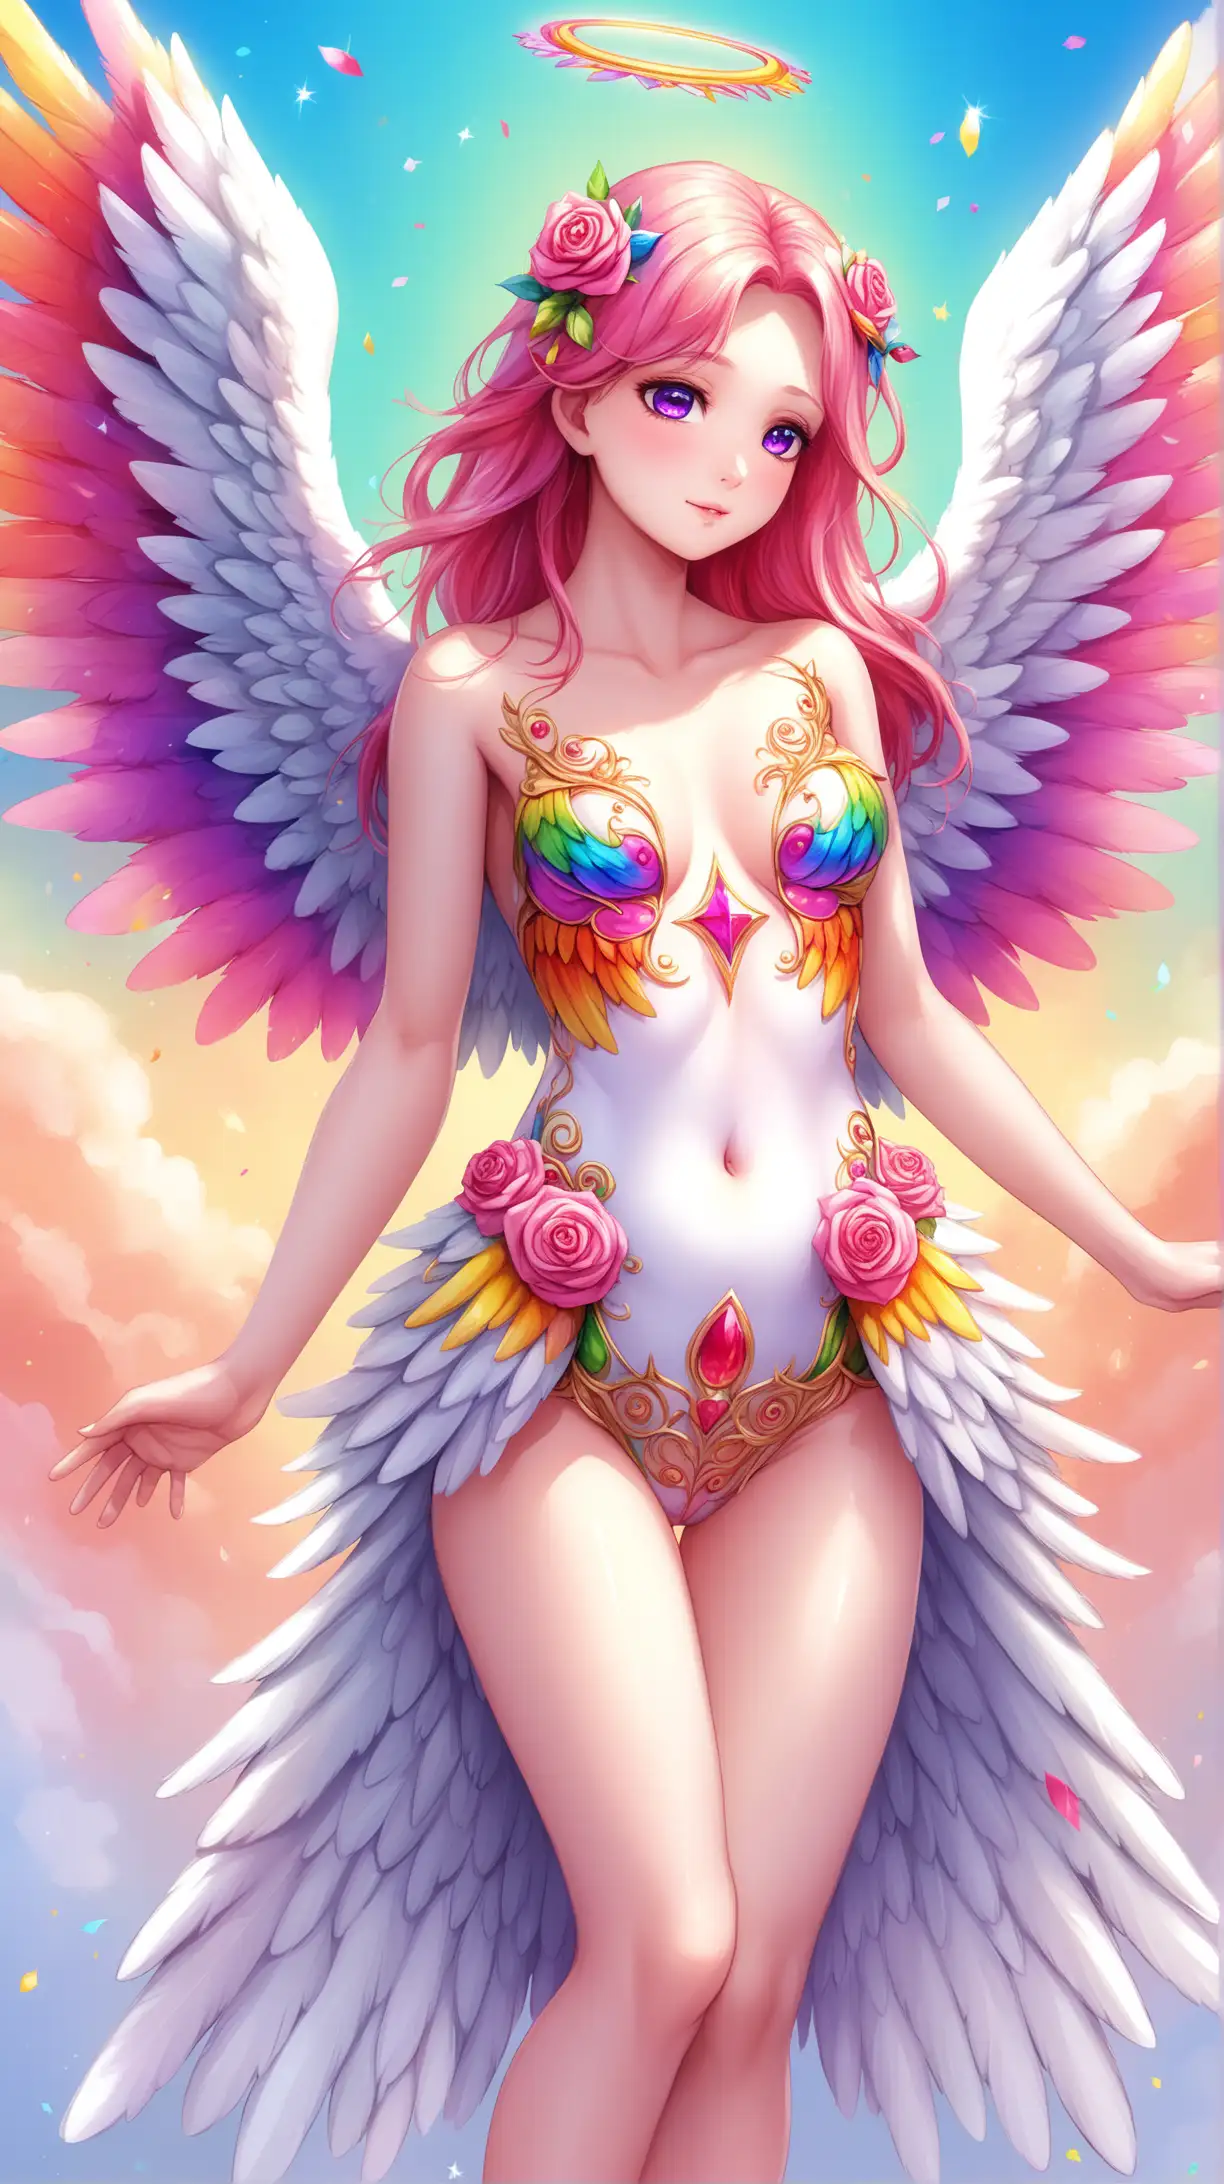 adult angel with a rosy complexion and vibrantly colorful wings